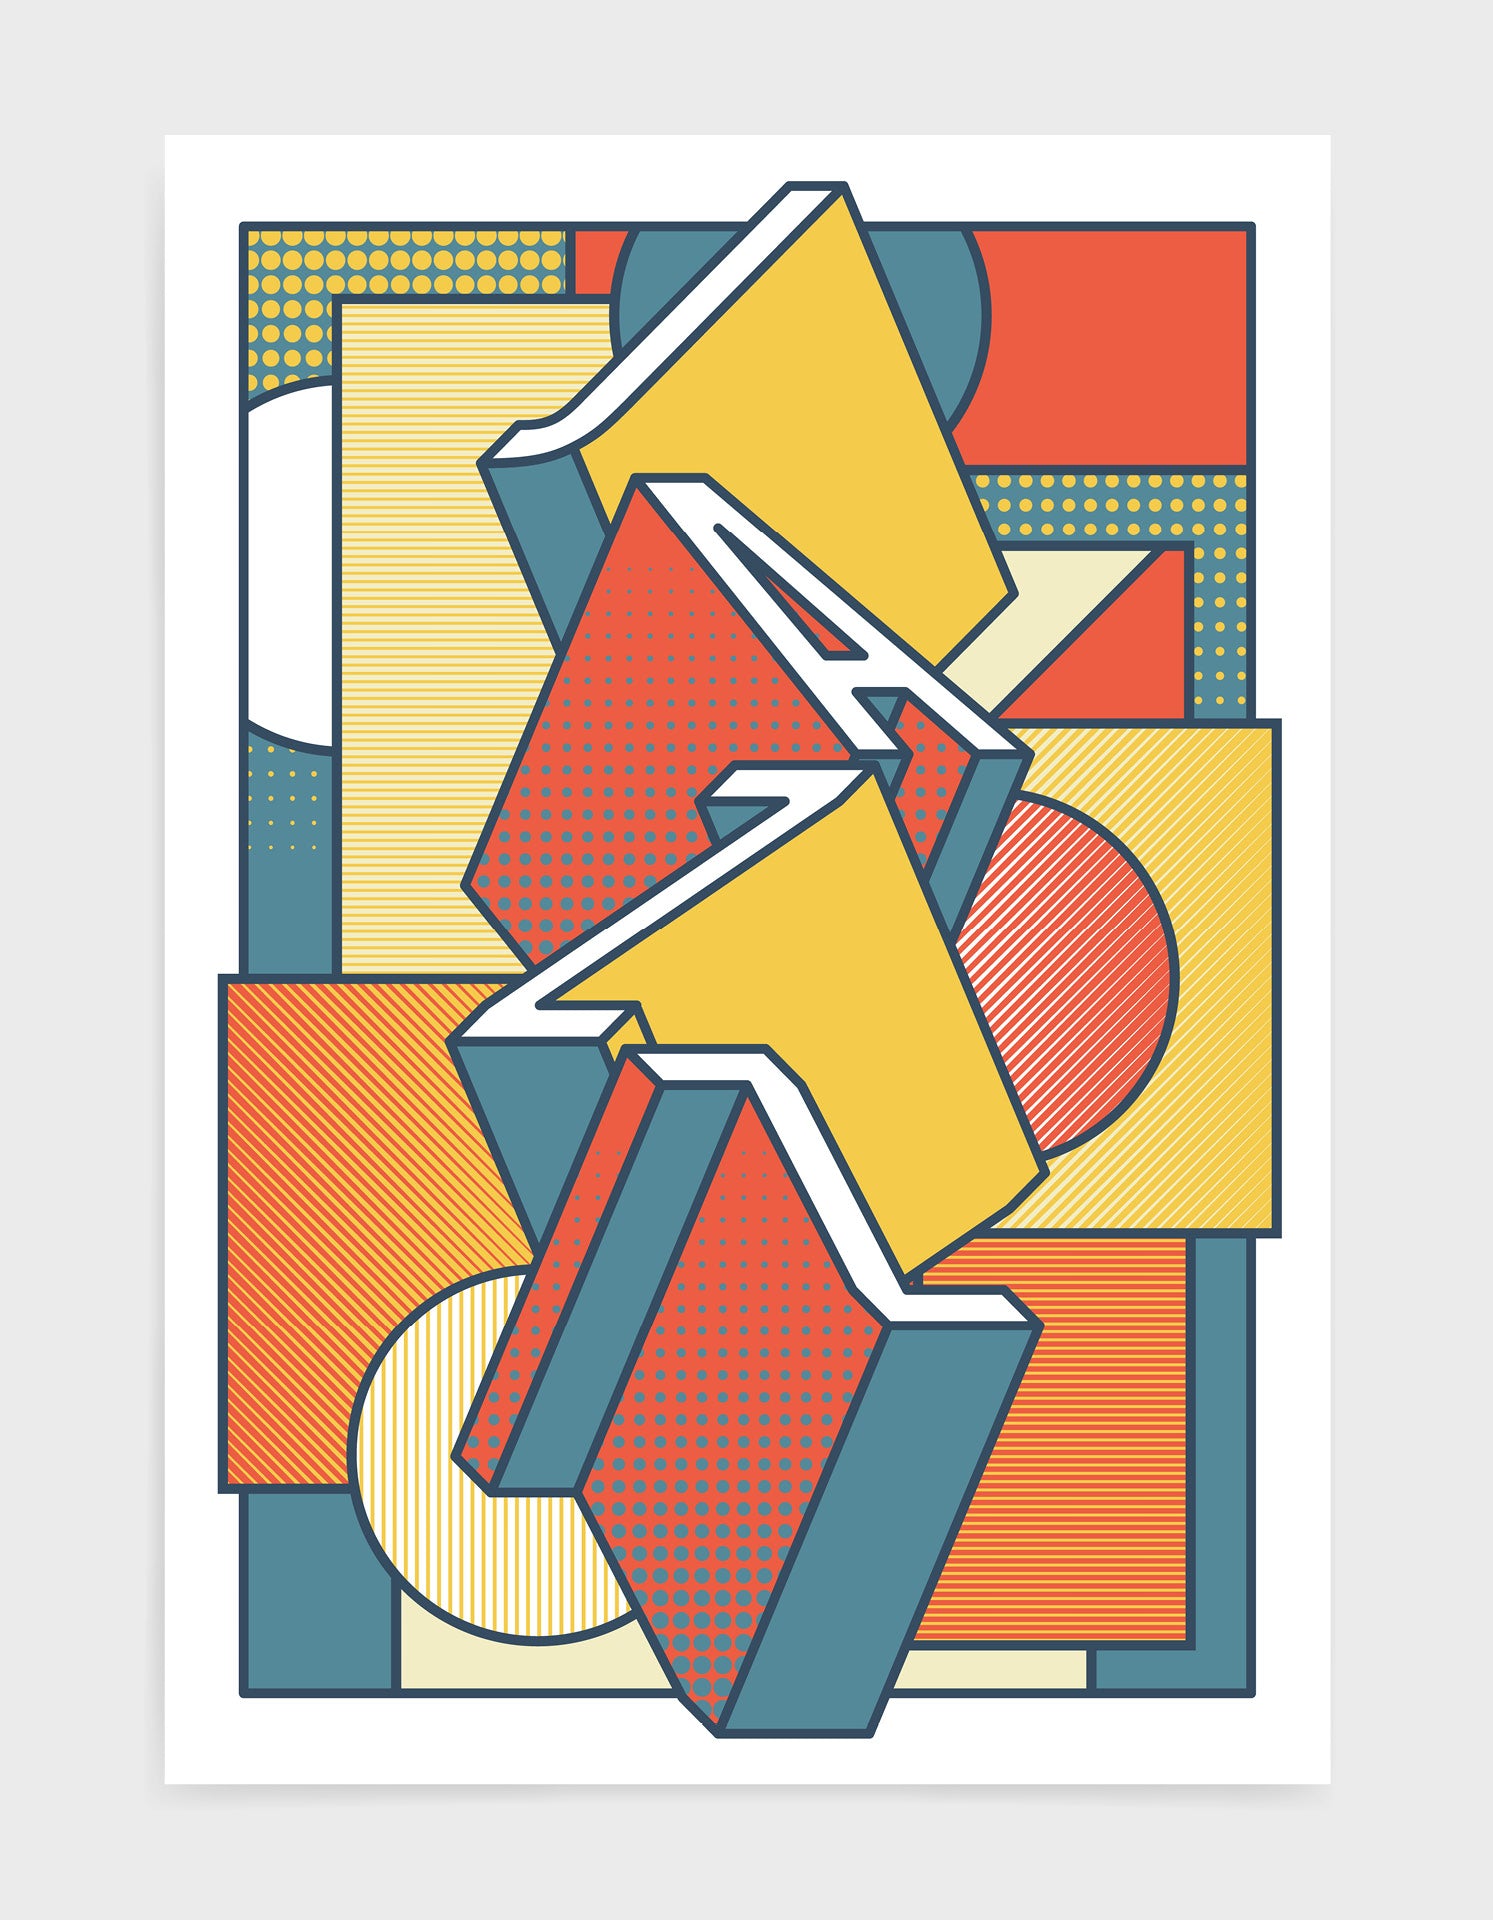 Jazz music art print featuring a geometric abstract pattern in bold shapes and orange tonal colours. Block typography depicts the word Jazz in tumbling text